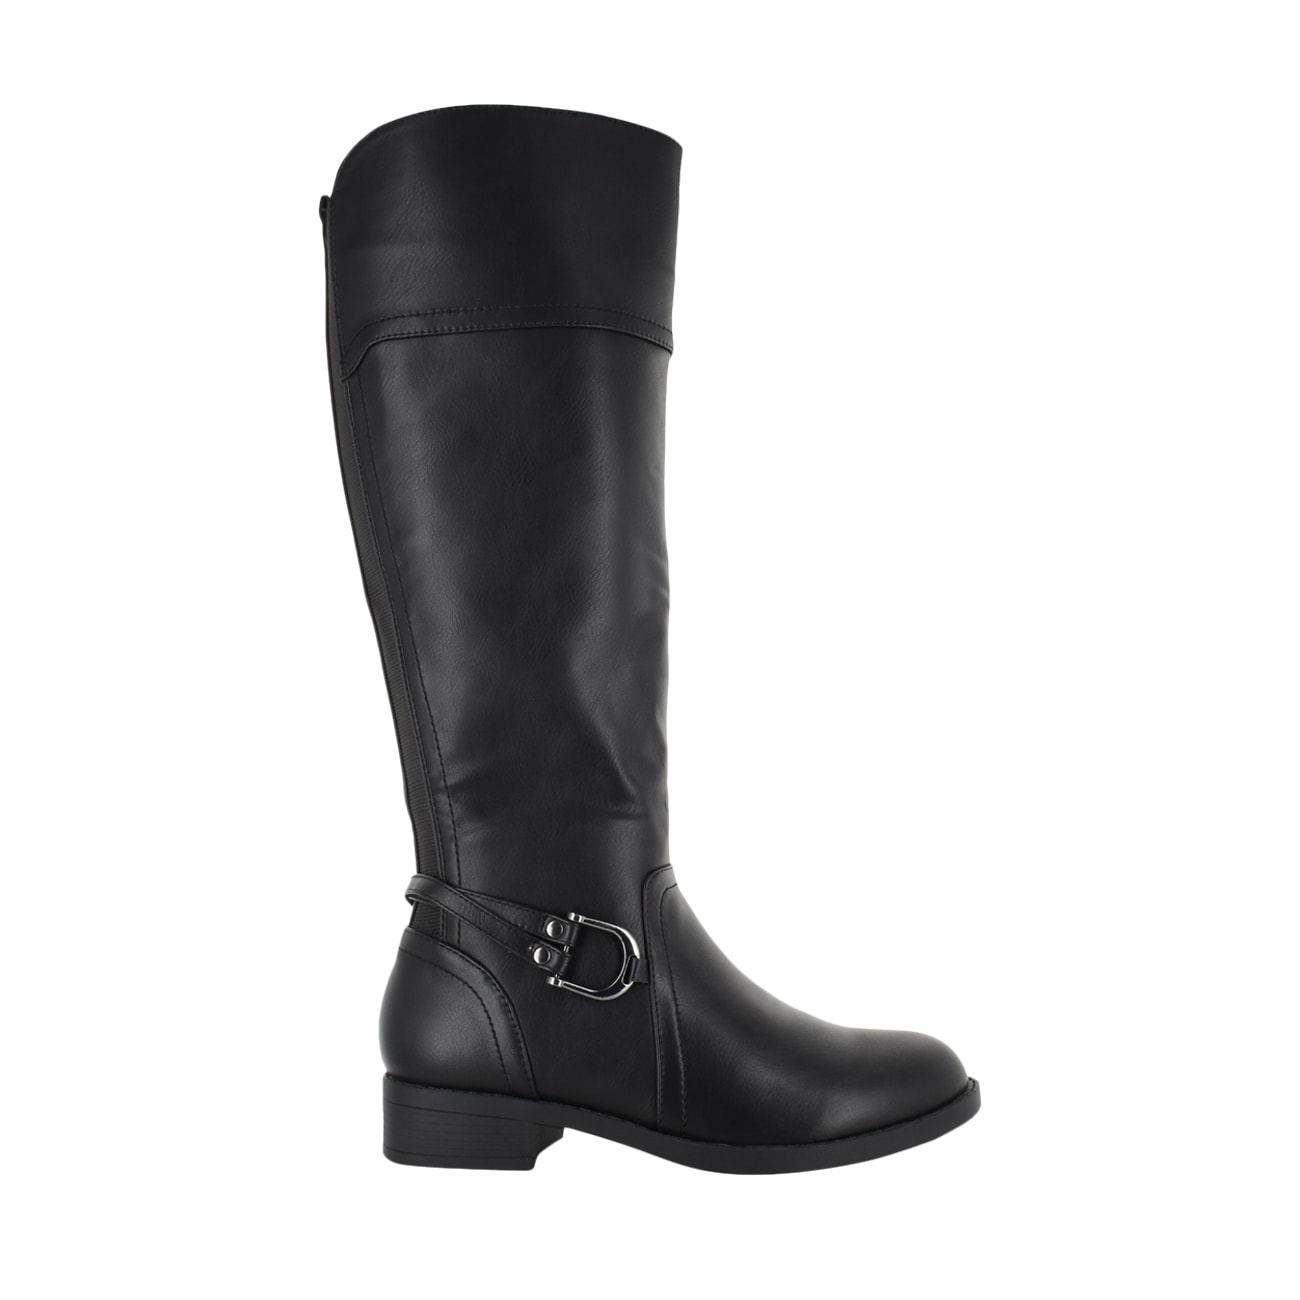 totes jennie waterproof boots